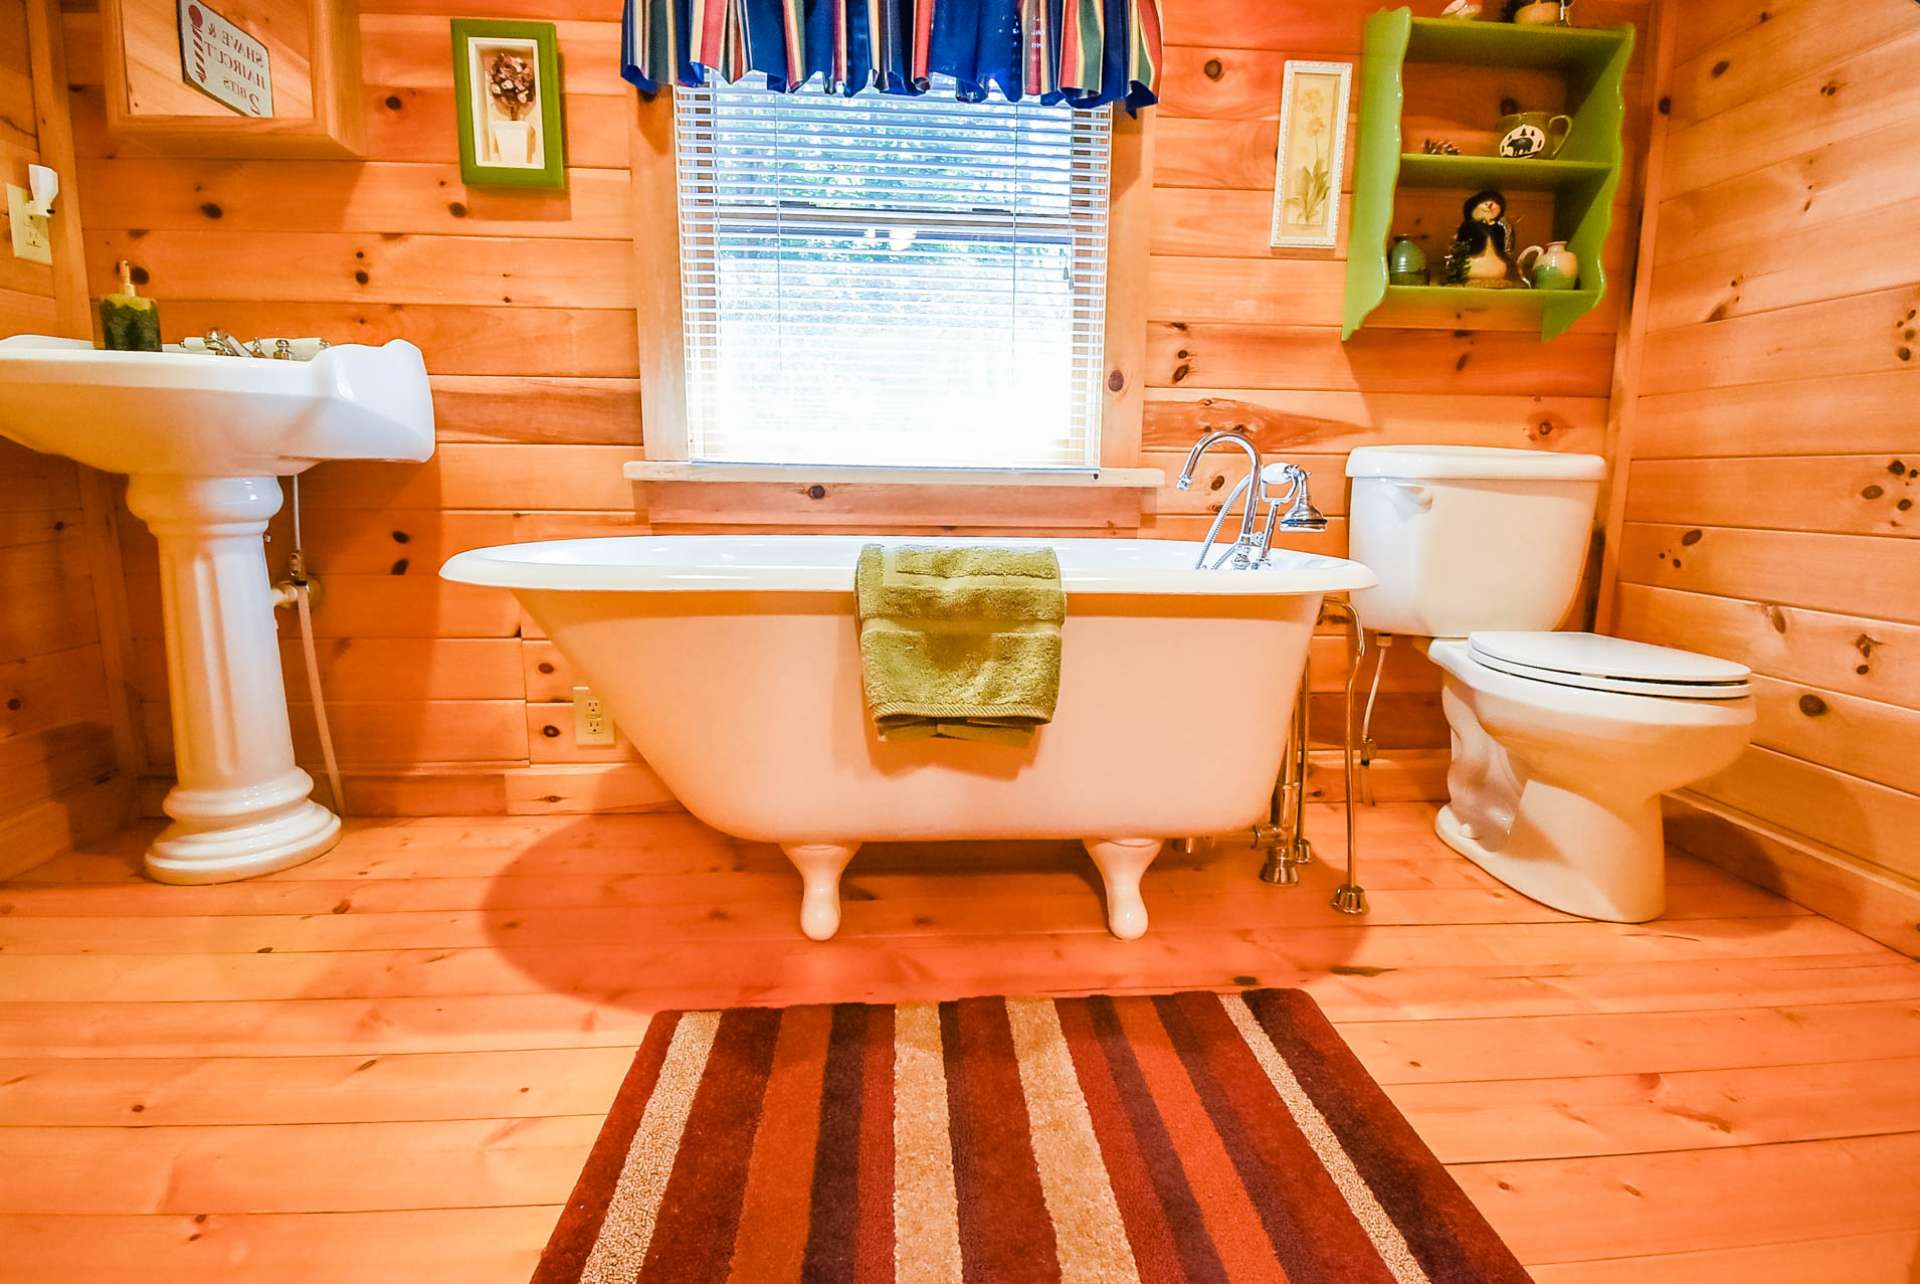 You will love the refurbished 1920s tub in the master bath adding even more charm to this cabin.